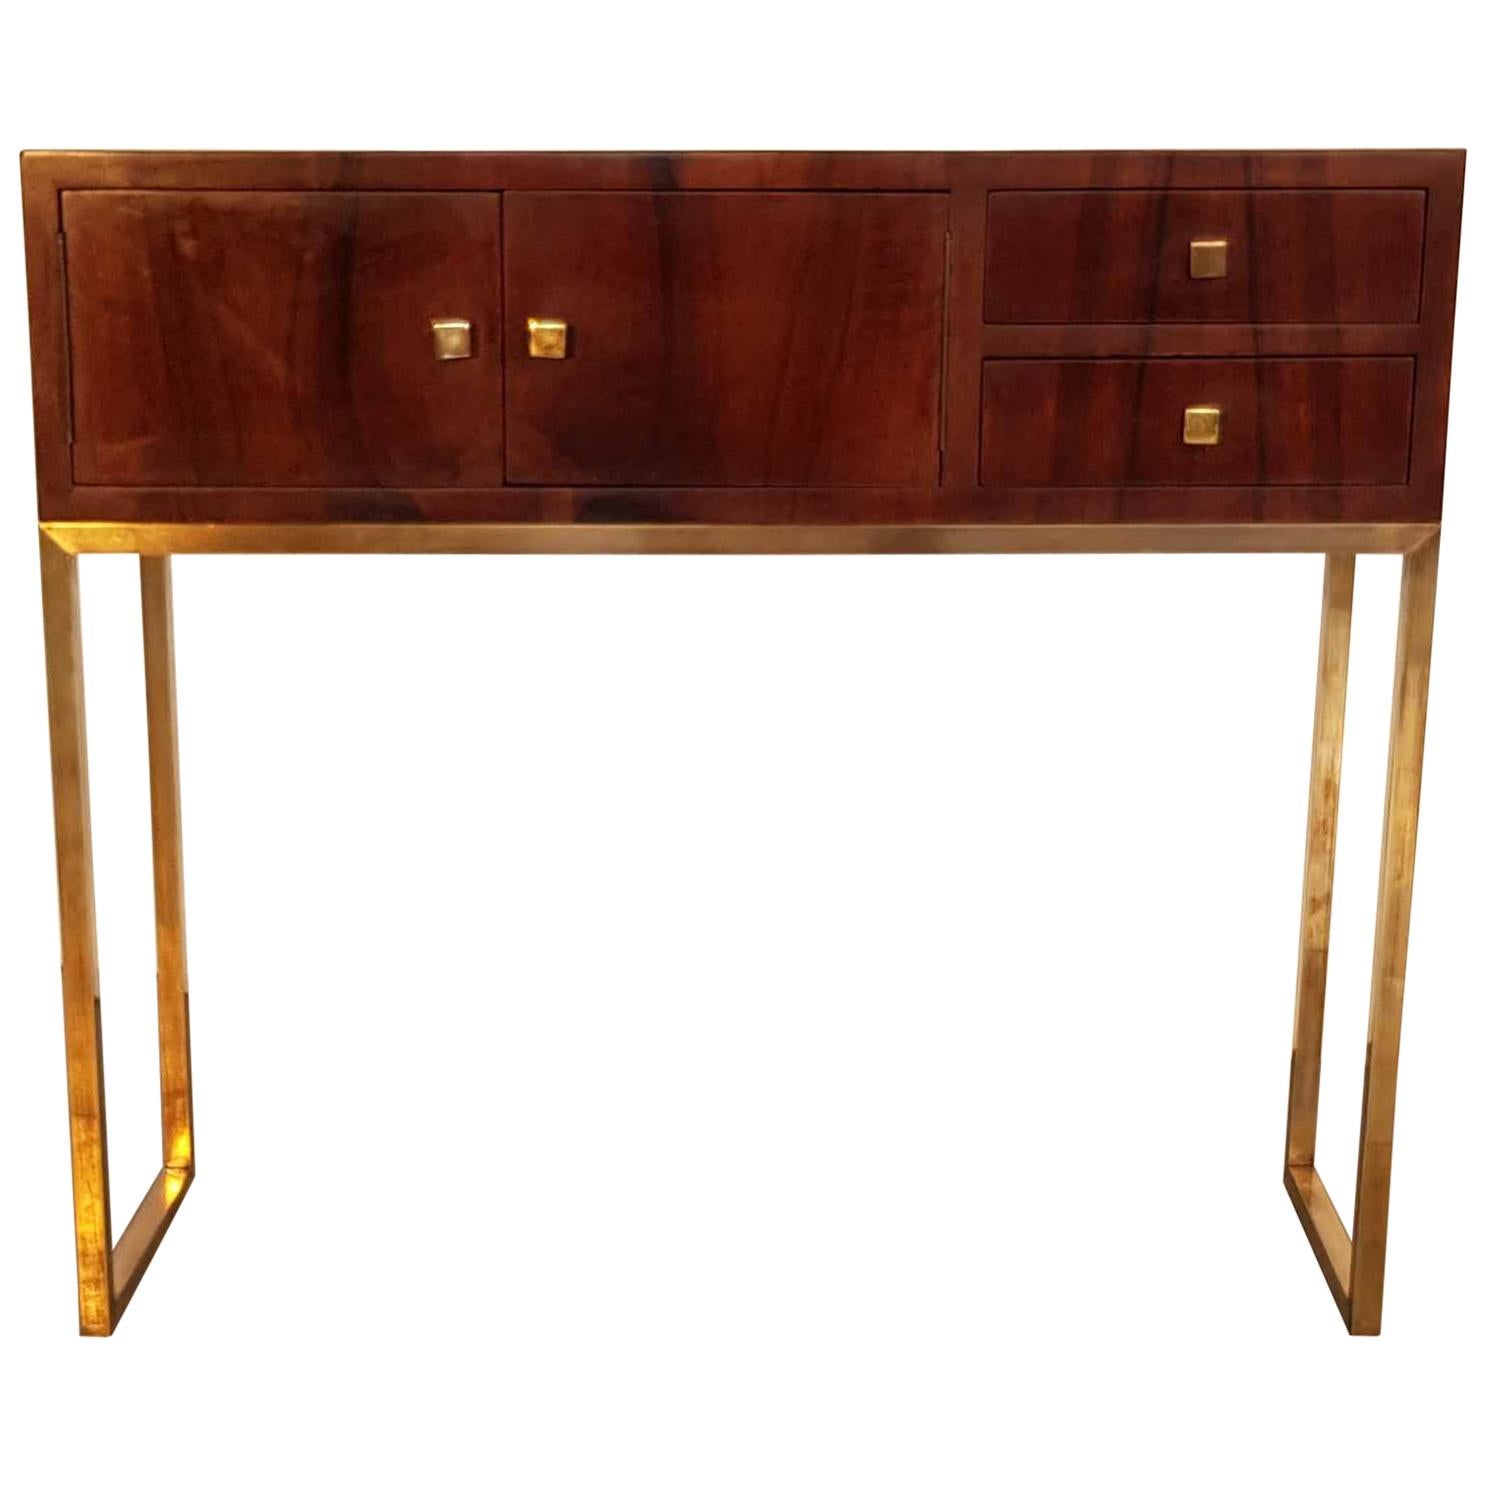 Hungarian Bauhaus Console with Hand-Polished Walnut Veneer on Brass Legs For Sale